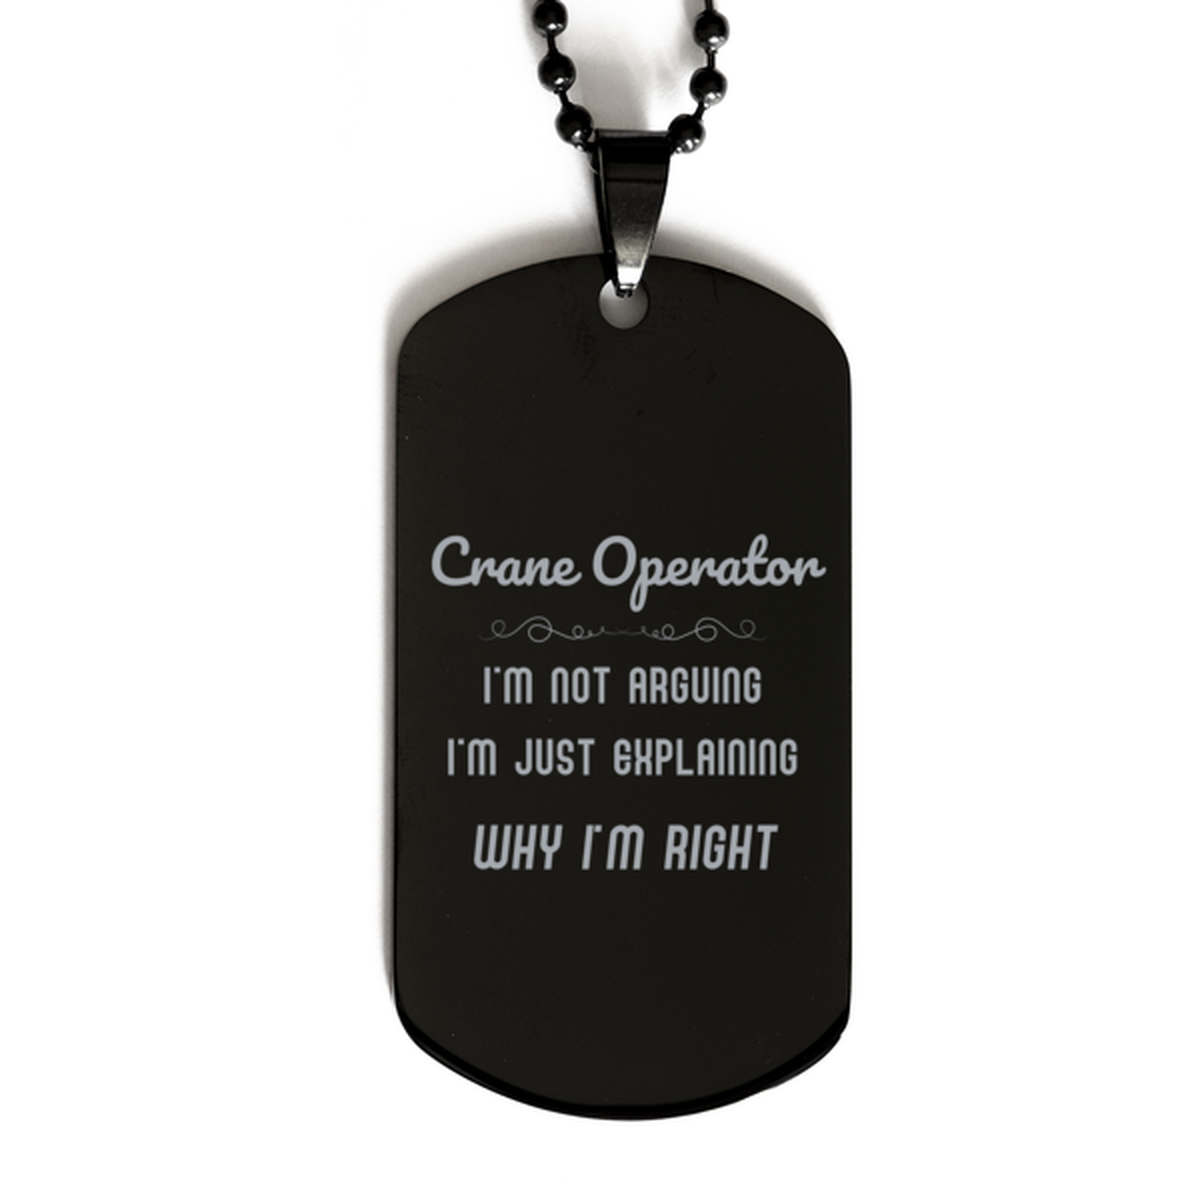 Crane Operator I'm not Arguing. I'm Just Explaining Why I'm RIGHT Black Dog Tag, Funny Saying Quote Crane Operator Gifts For Crane Operator Graduation Birthday Christmas Gifts for Men Women Coworker